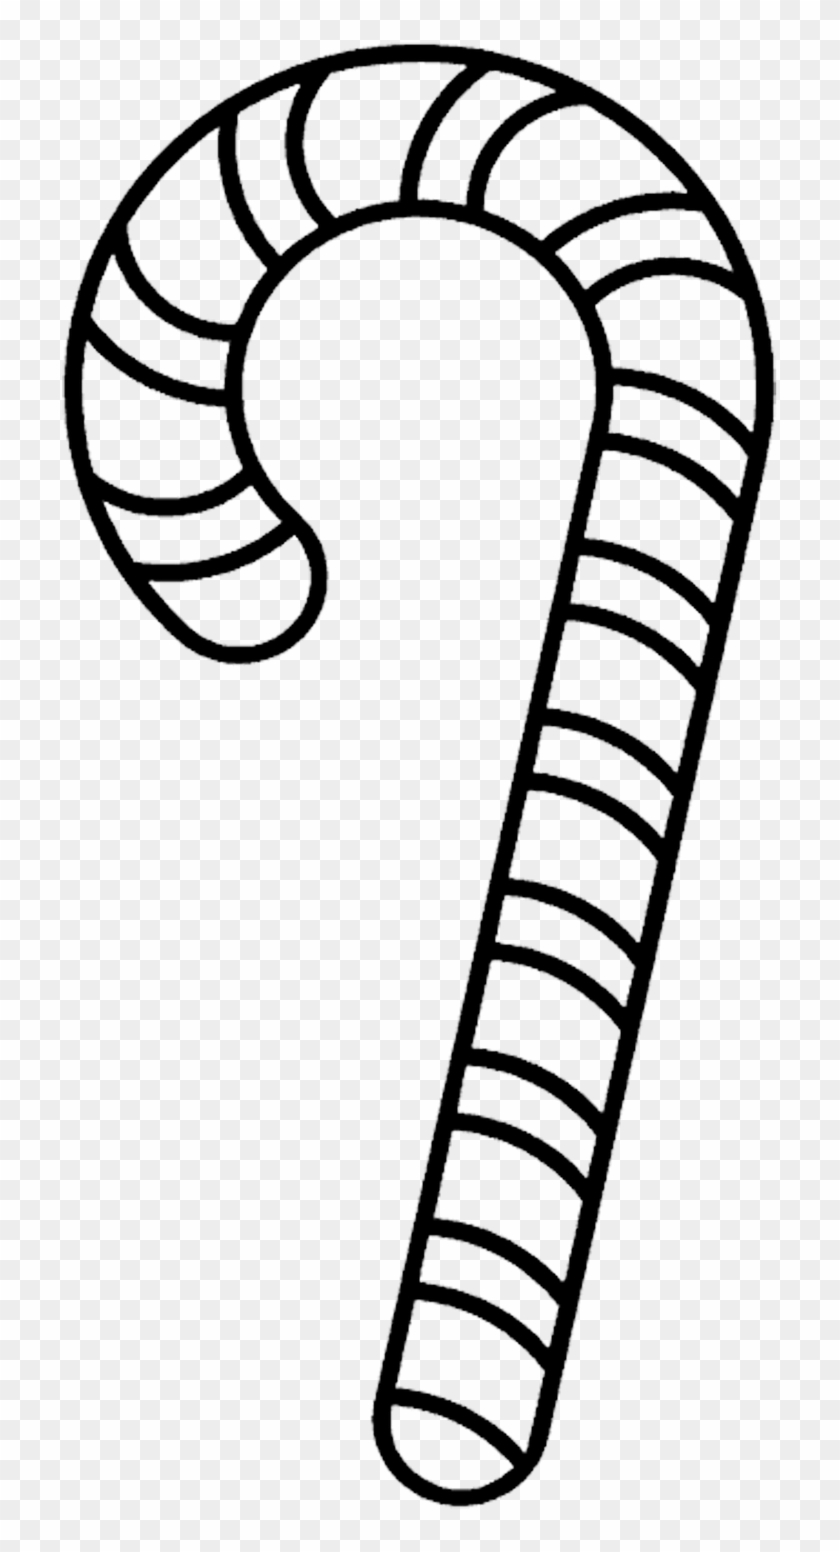 Black And White Candy Cane - Candy Cane Coloring Page #1015651